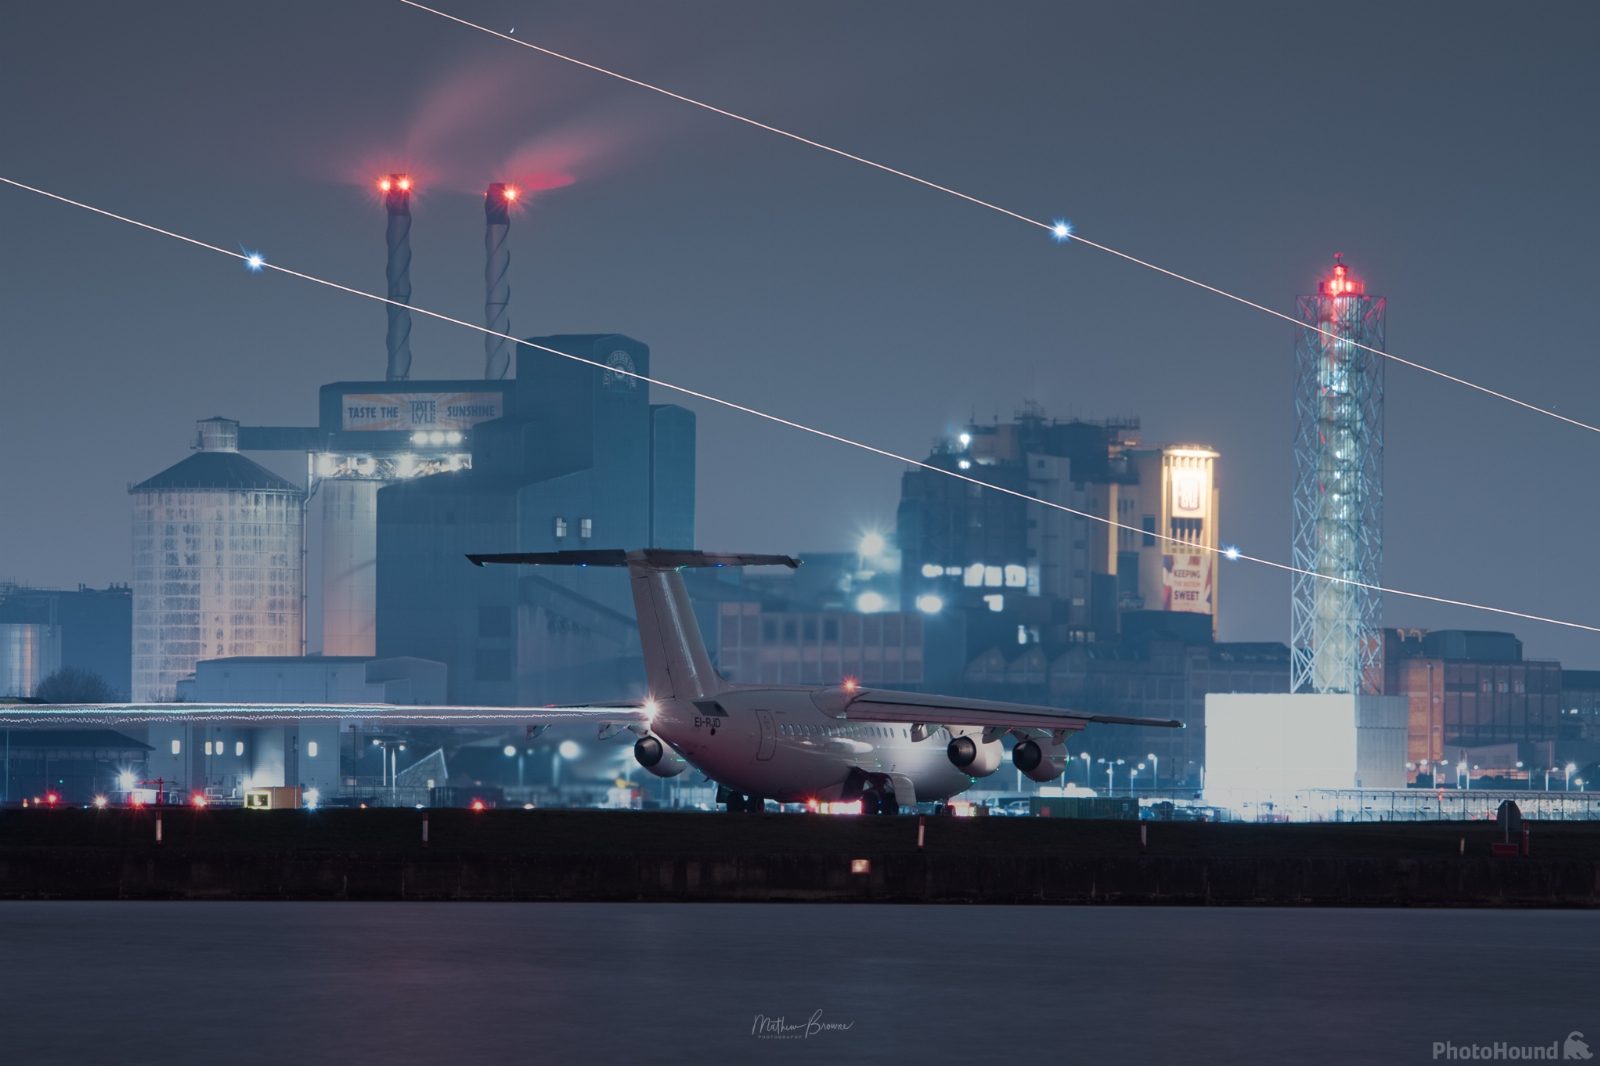 Image of London City Airport - Runway View by Mathew Browne